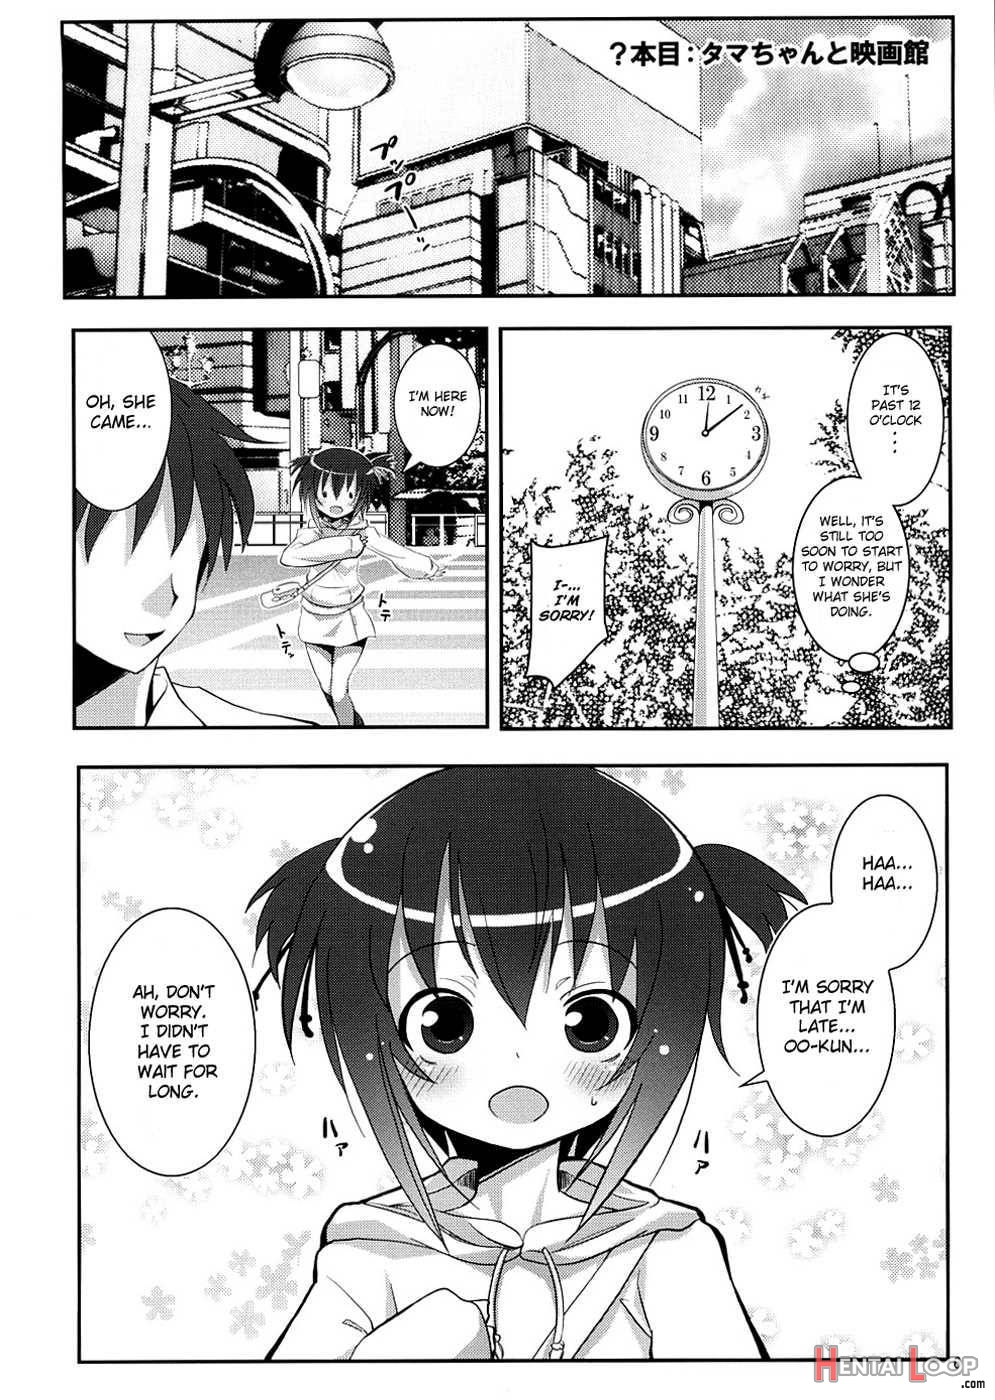 Tama-chan to Date page 2